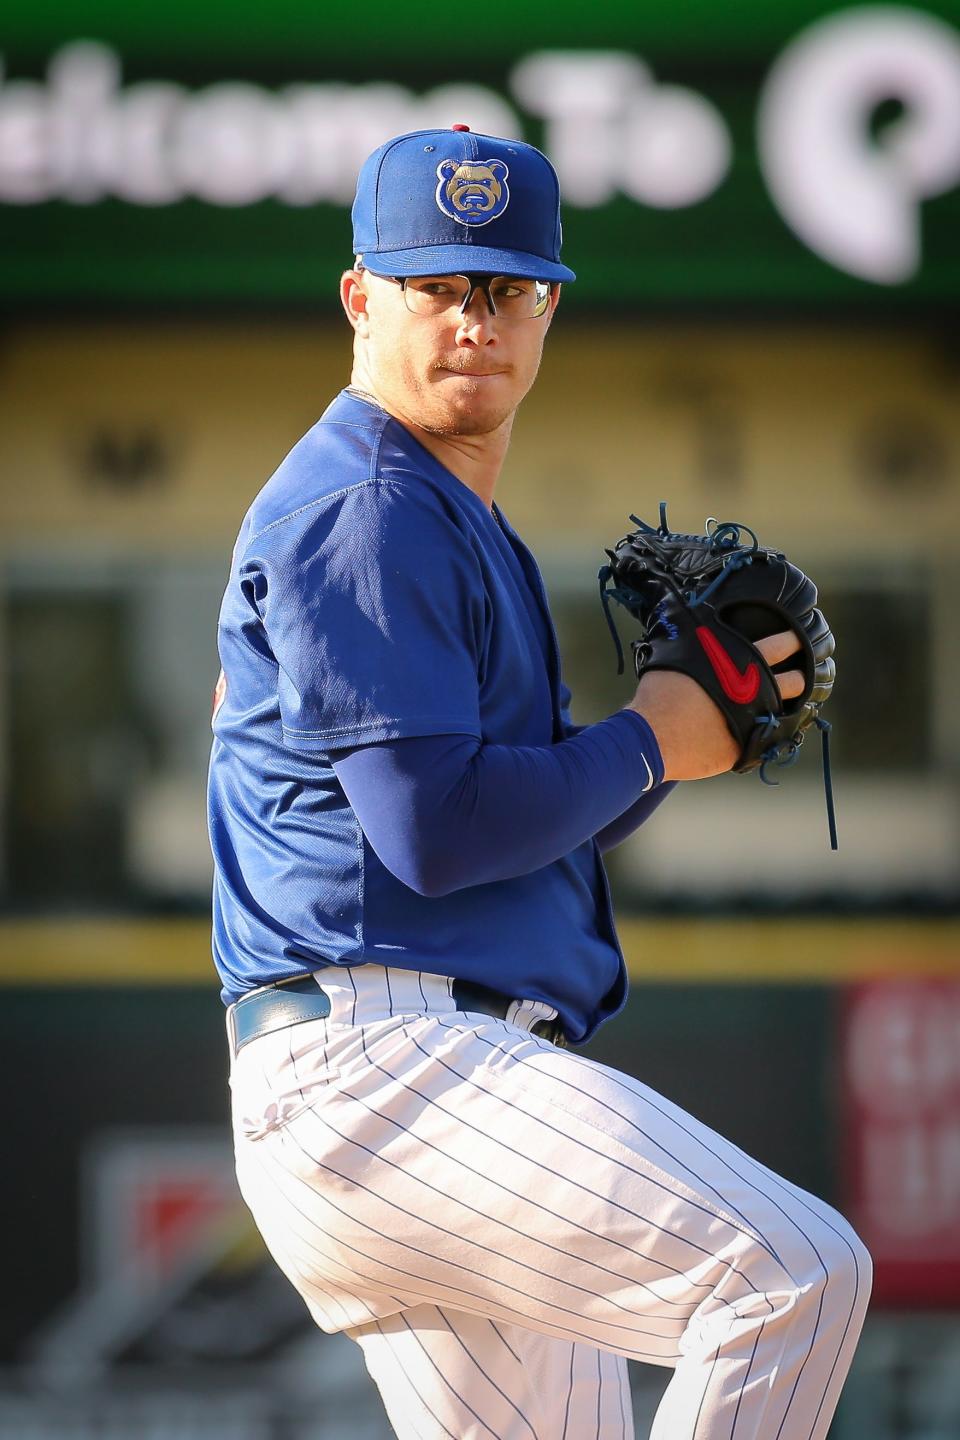 Iowa Cubs pitcher Jordan Wicks was a first-round pick by the Chicago Cubs in 2021.